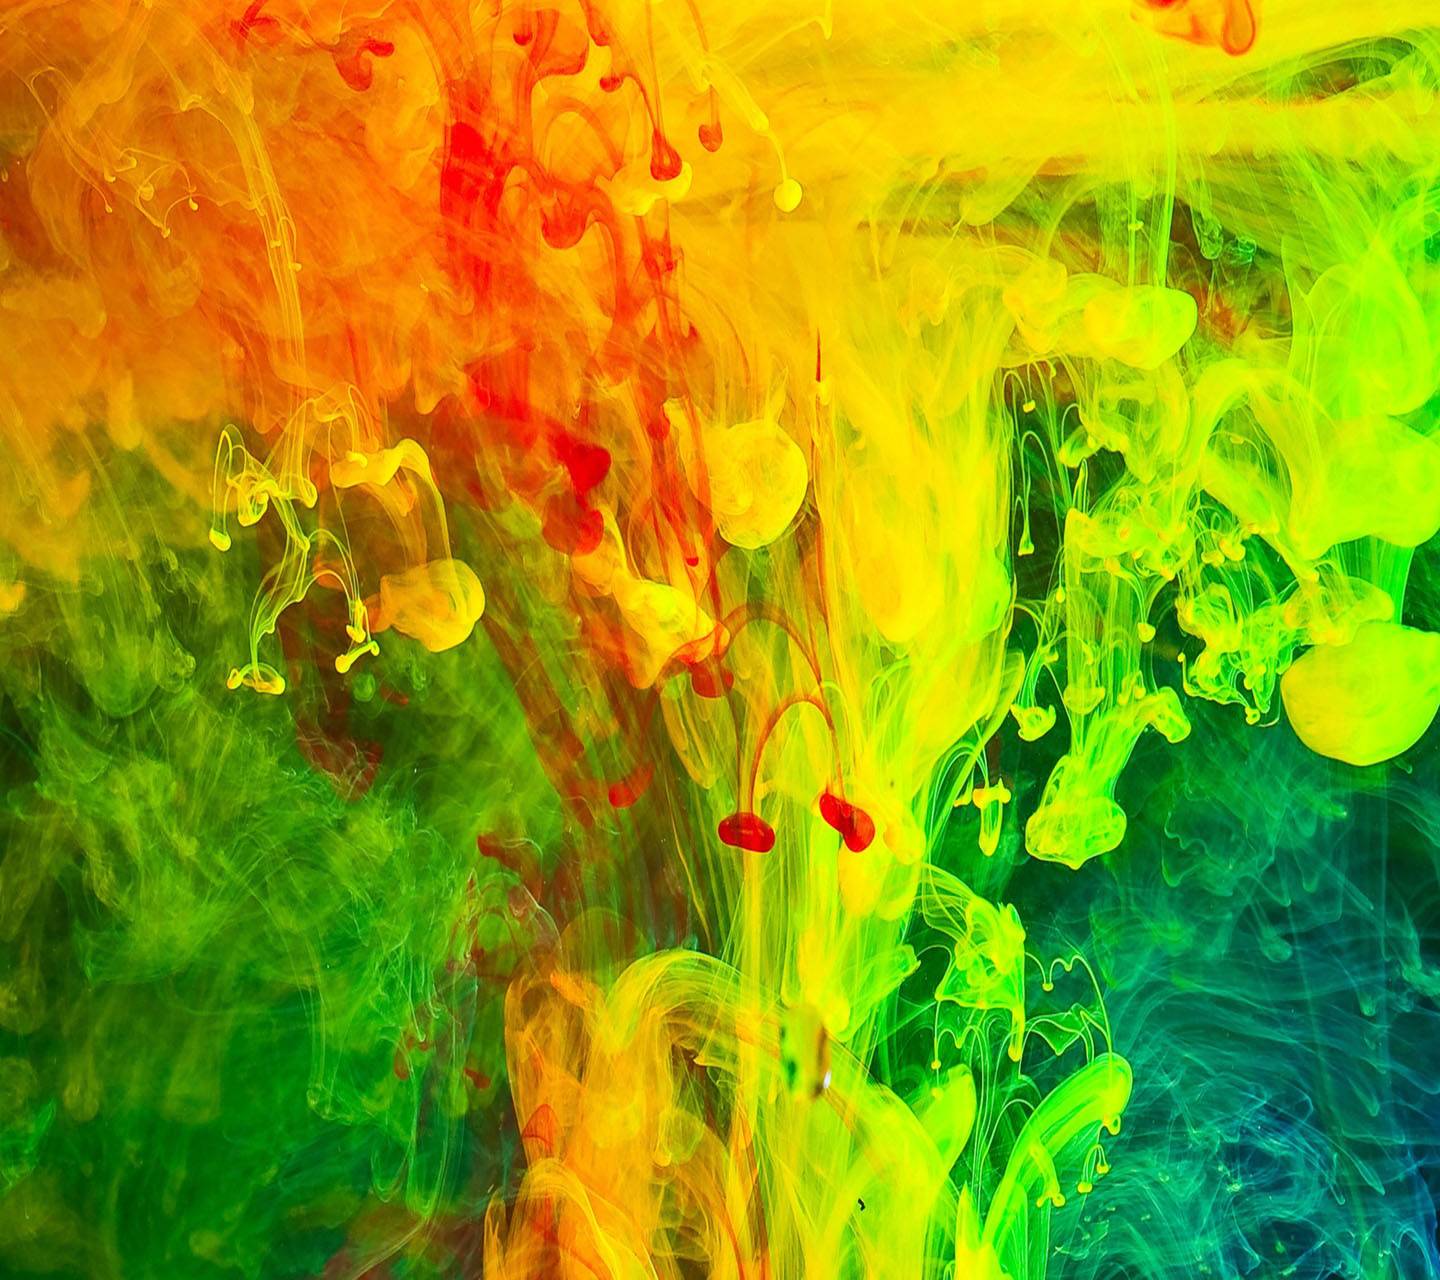 Replace With Our Own Words Happy Holi Wallpaper, Holi Colors, Happy Holi  Photo 